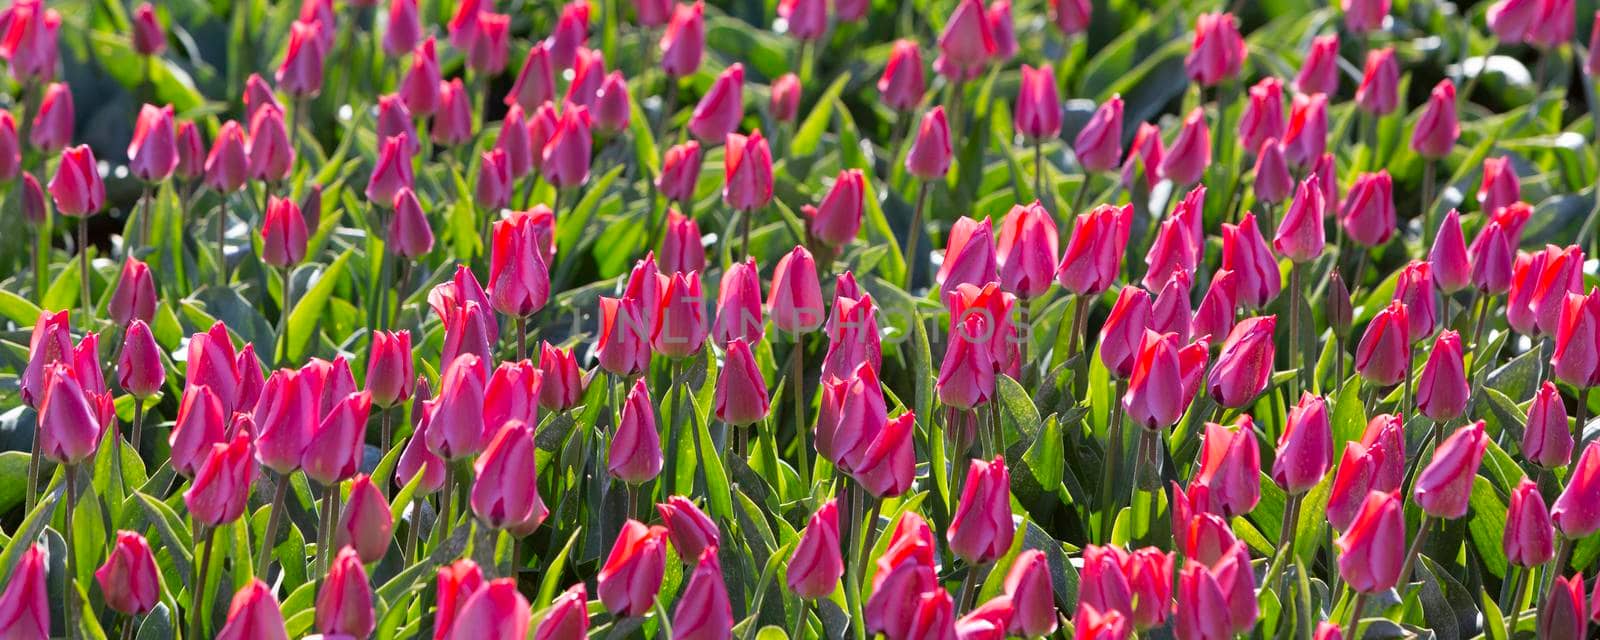 panorama picture with pink tulips in field under blue sky